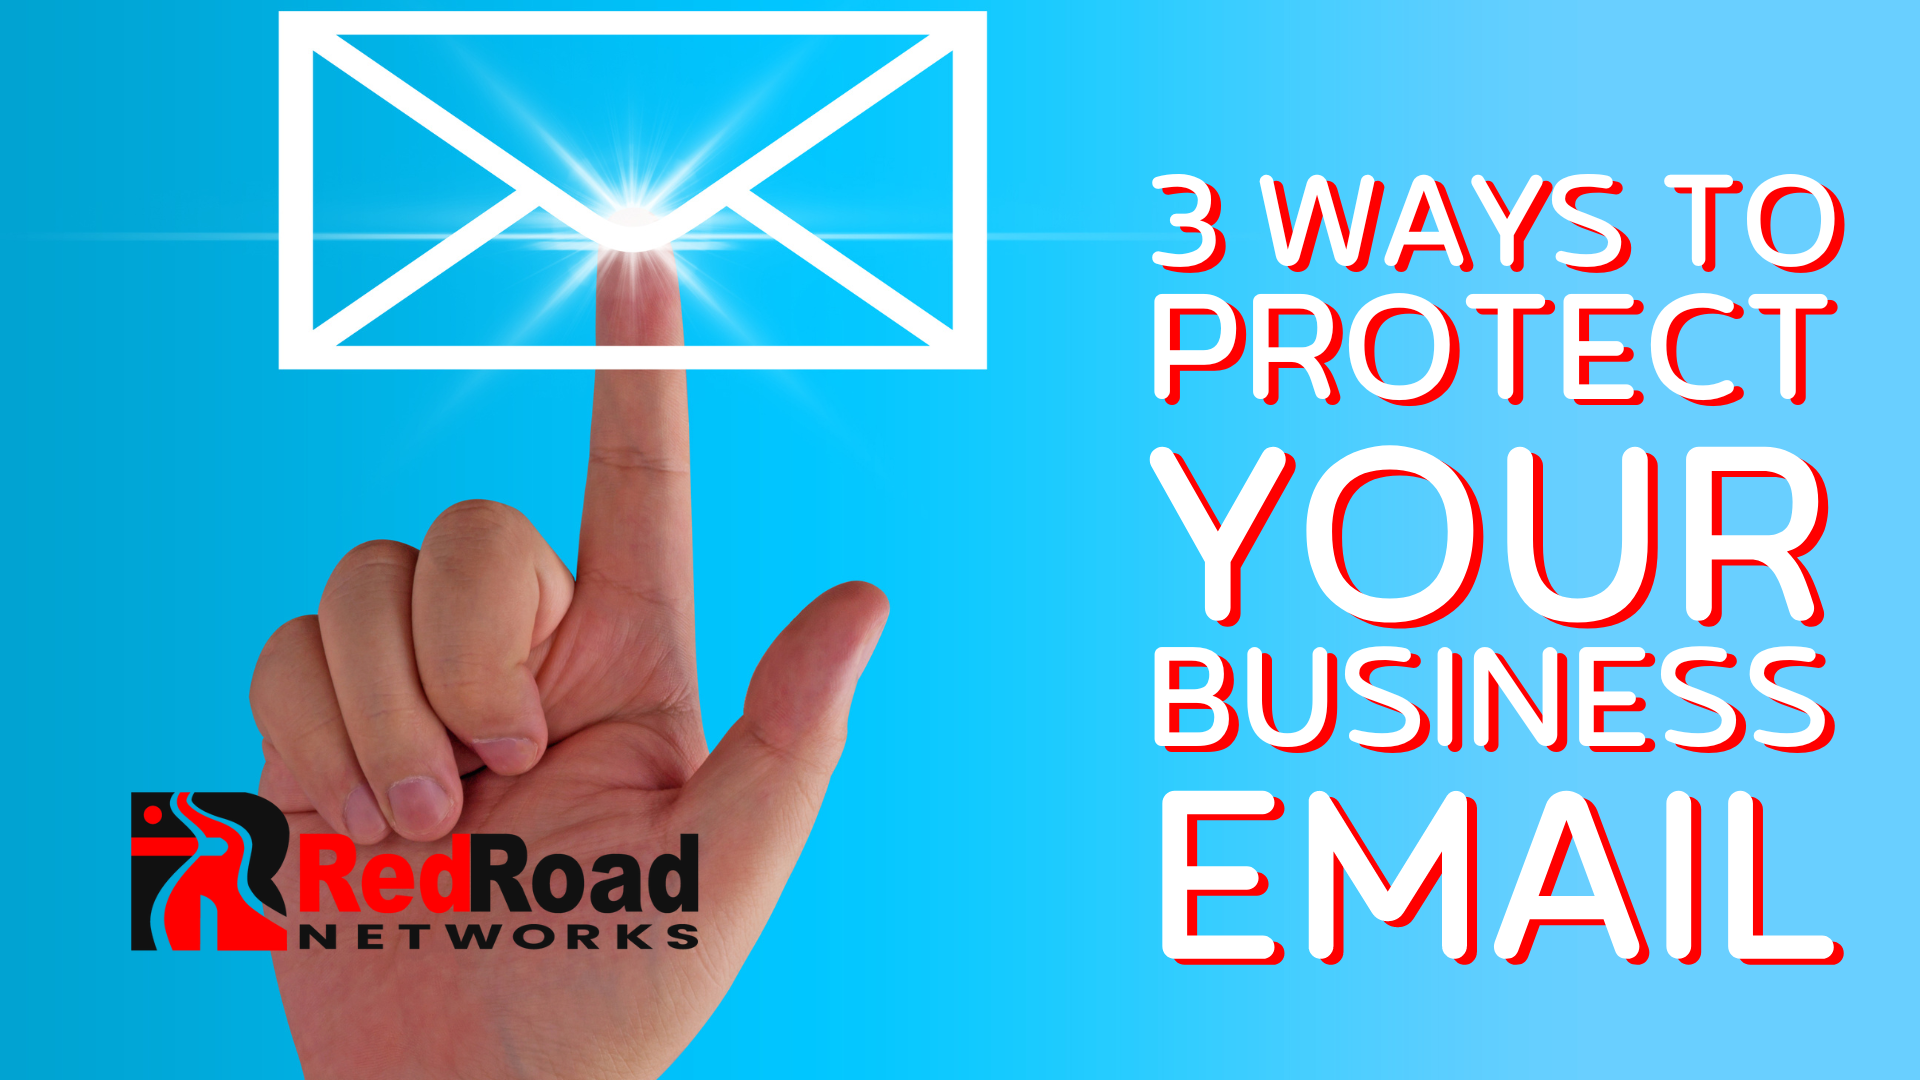 3 ways to protect your business email